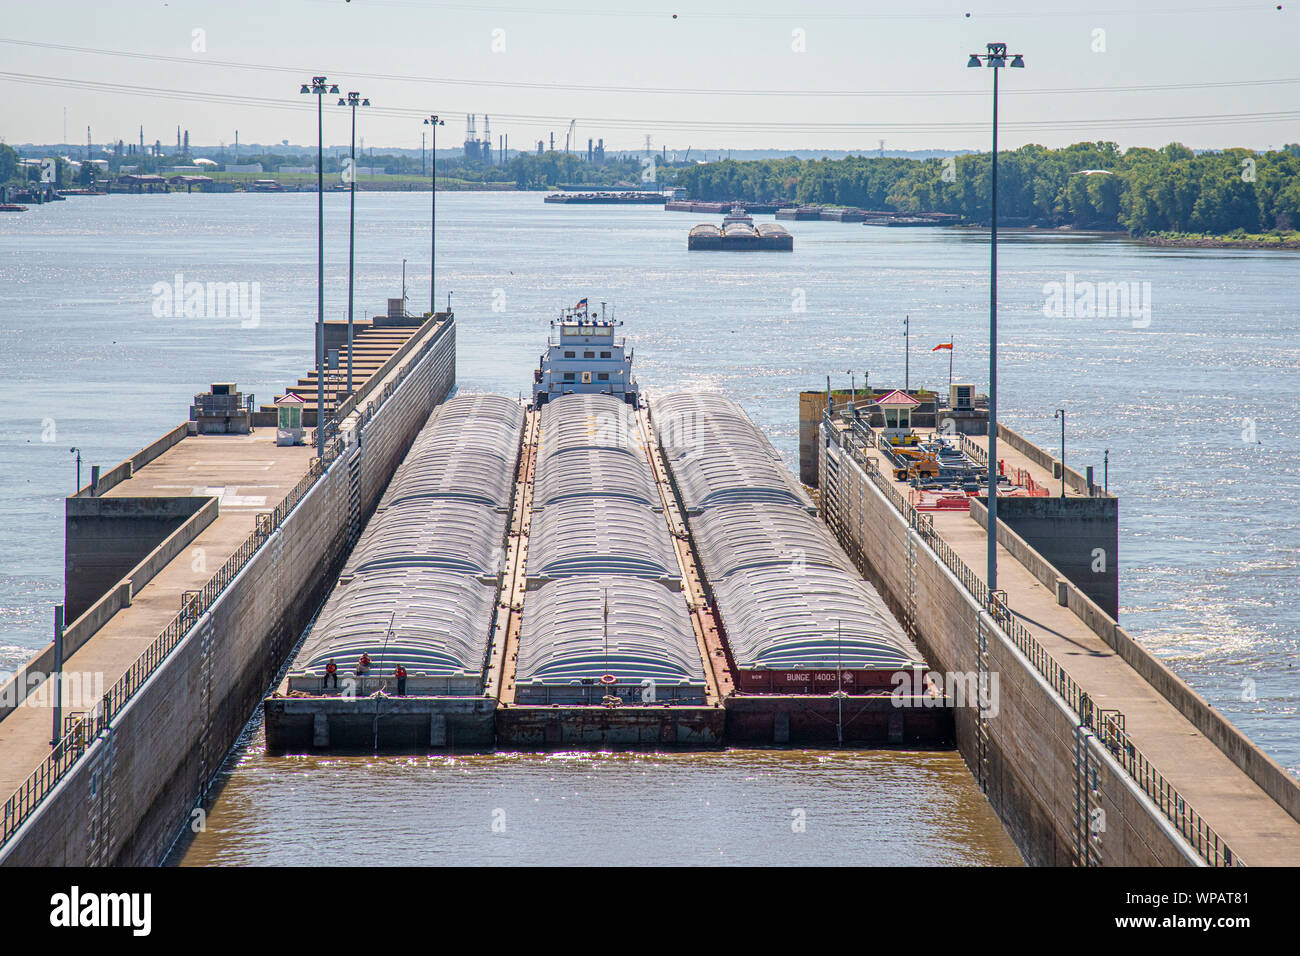 Barge traffic on the Mississippi River at the Melvin Price Locks and Dam  Facility August 29, 2019 near Alton, Illinois, USA. A typical barge carries  1500 tons of cargo, which is 15